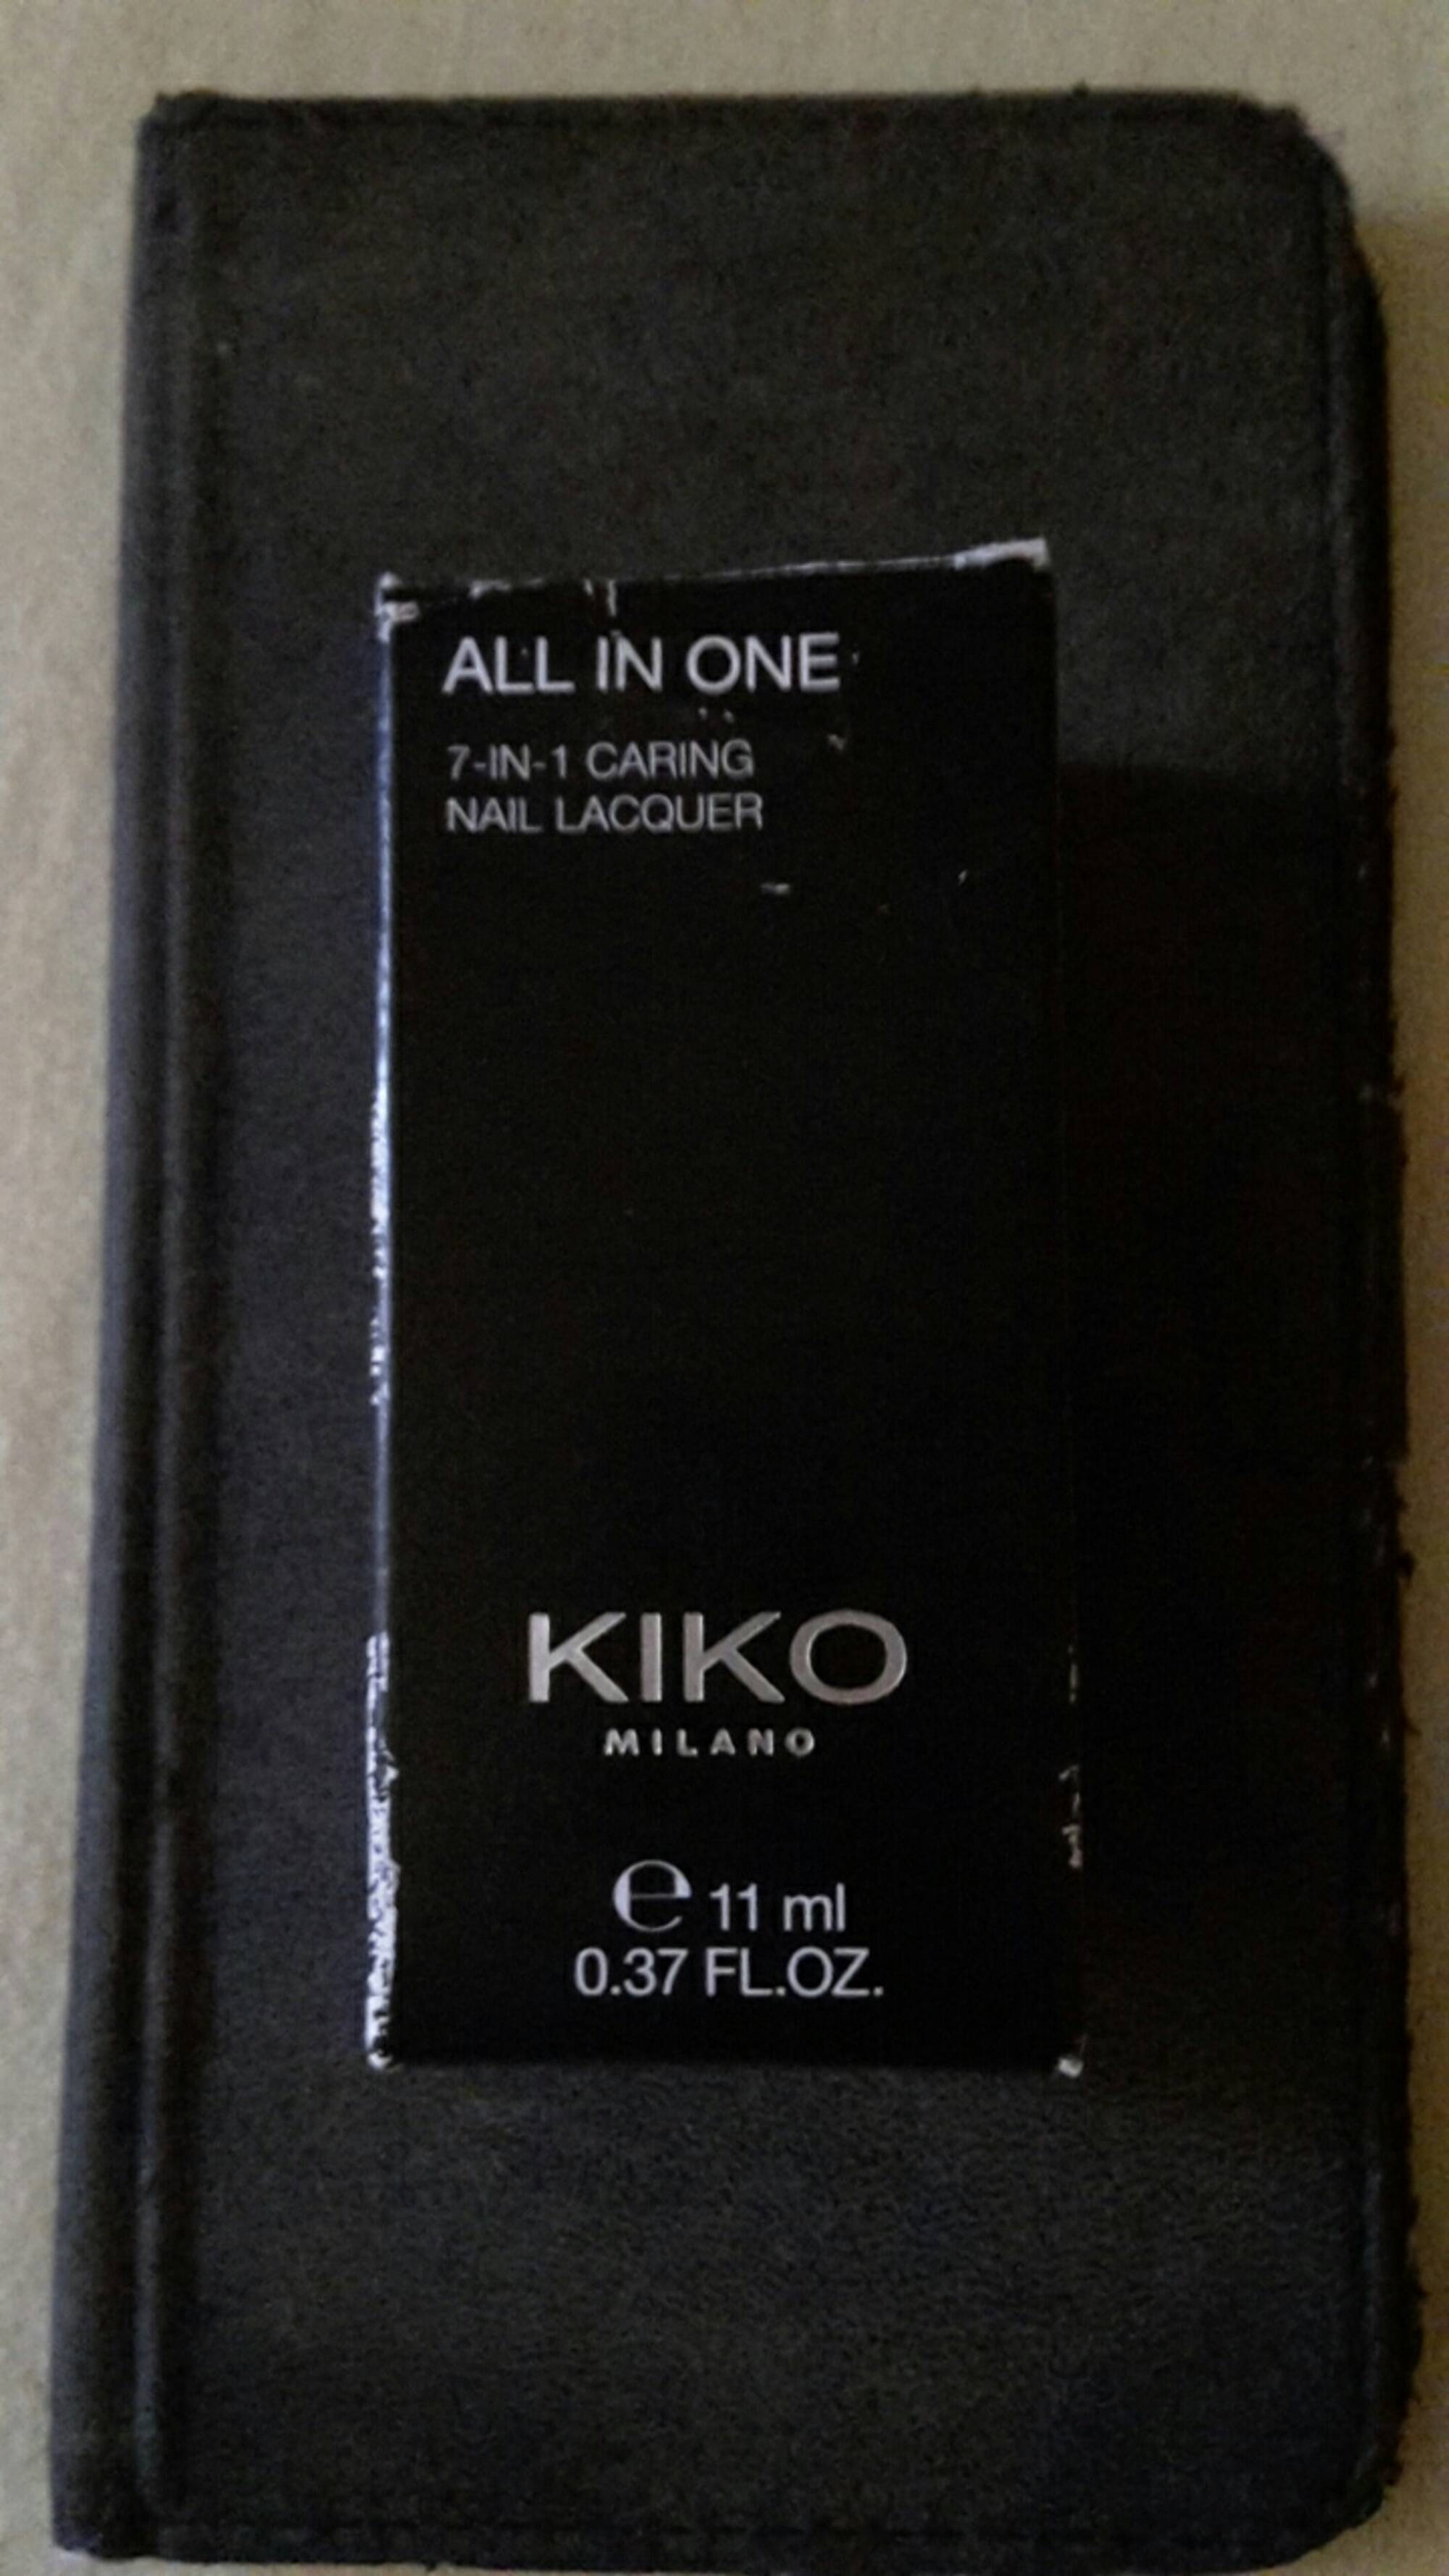 KIKO MILANO - All in one - 7-in-1 Caring nail lacquer